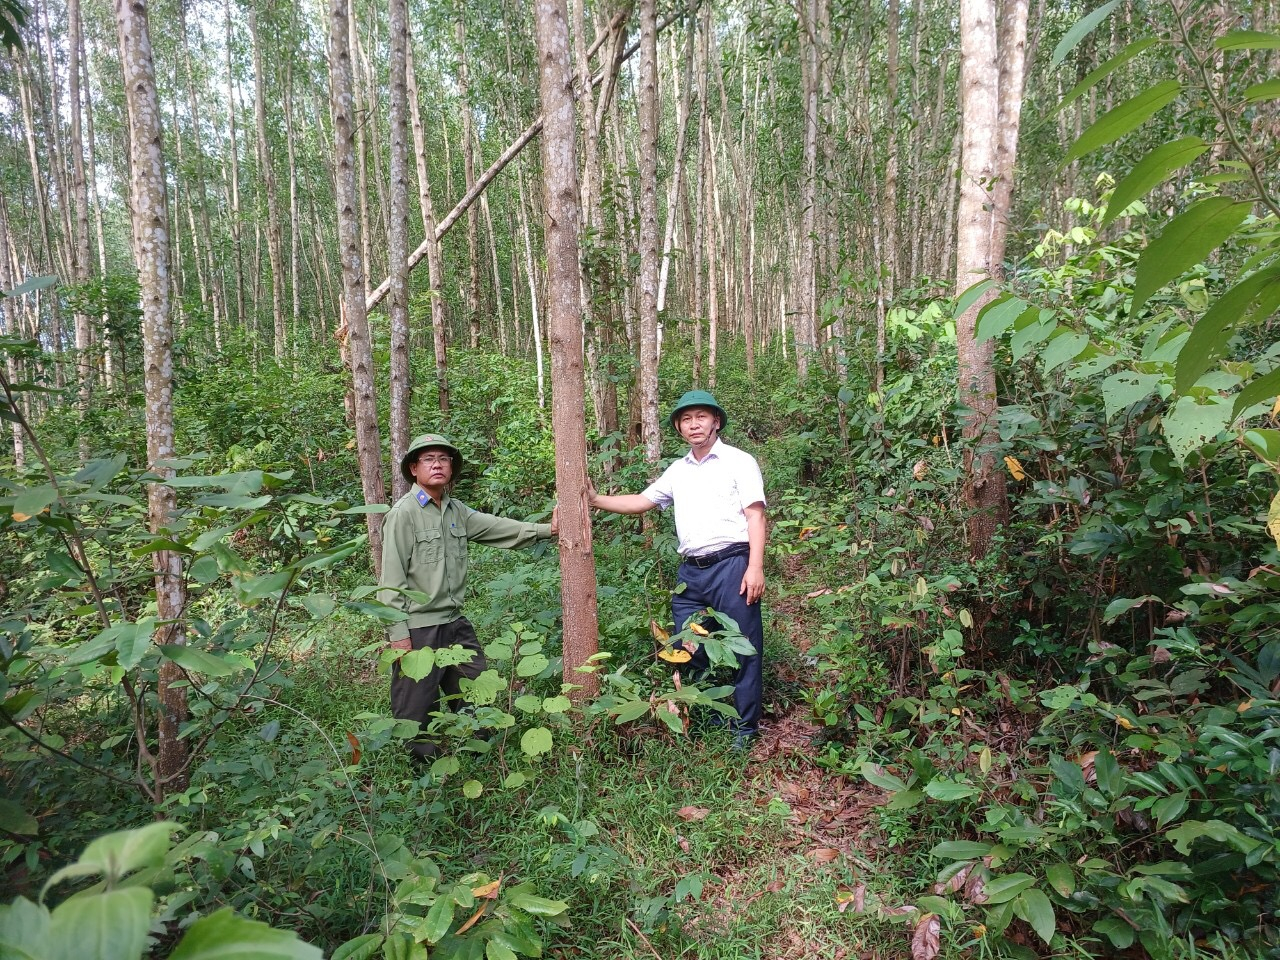 Binh Dinh has an affluent plantation wood material area, so it is a good opportunity for Japanese businesses to invest in forest product processing. Photo: V.D.T.